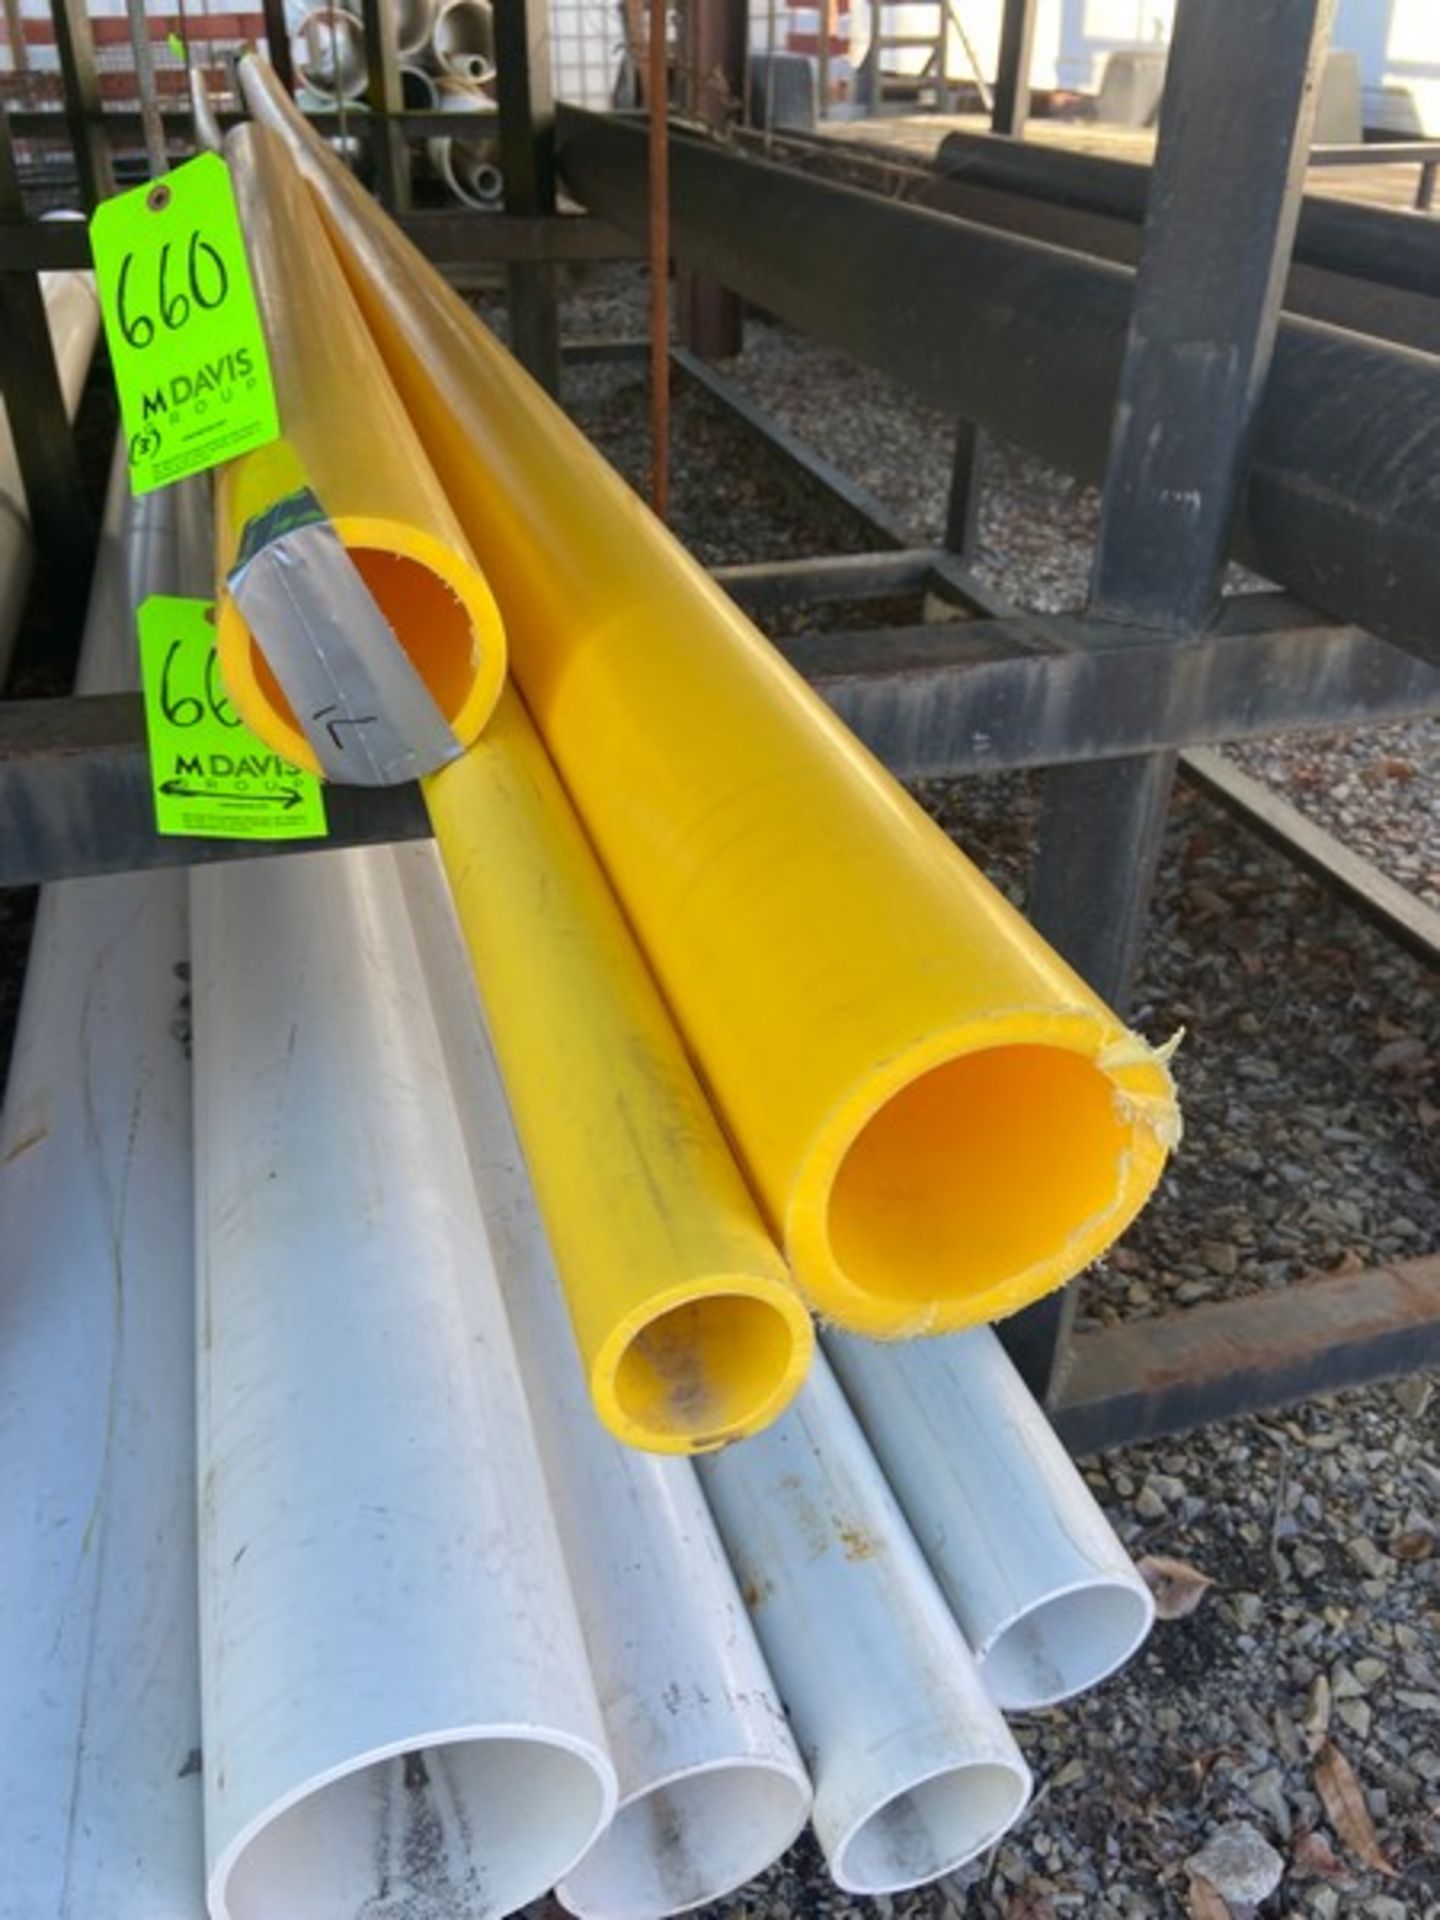 Straight Sections of Yellow PVC Pipe (LOCATED IN MONROEVILLE, PA) (RIGGING, LOADING, & SITE